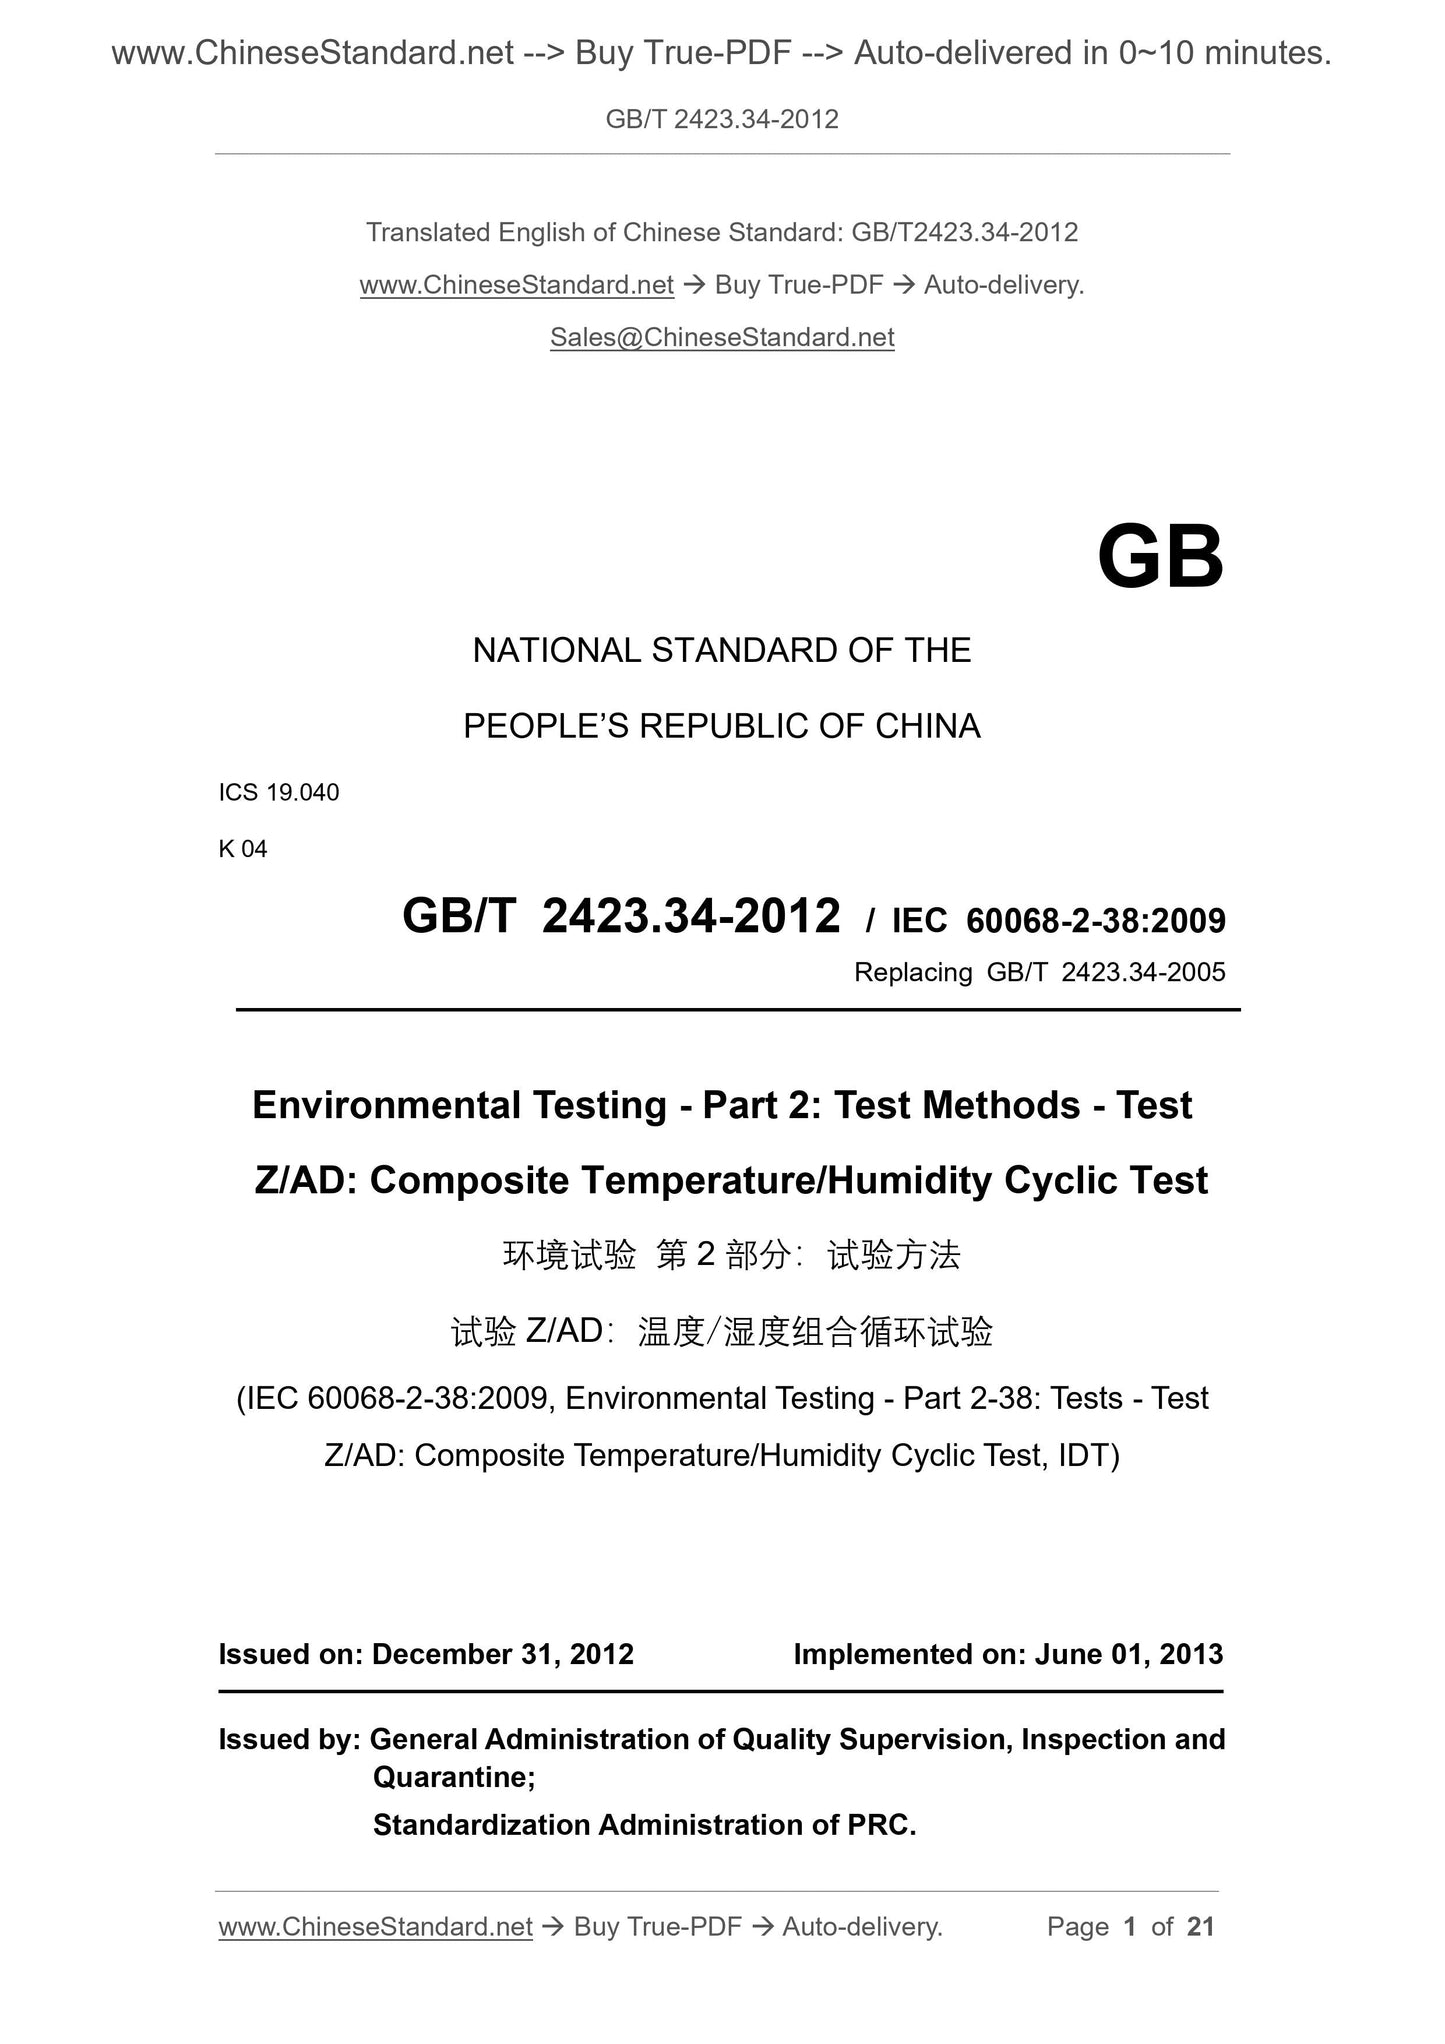 GB/T 2423.34-2012 Page 1